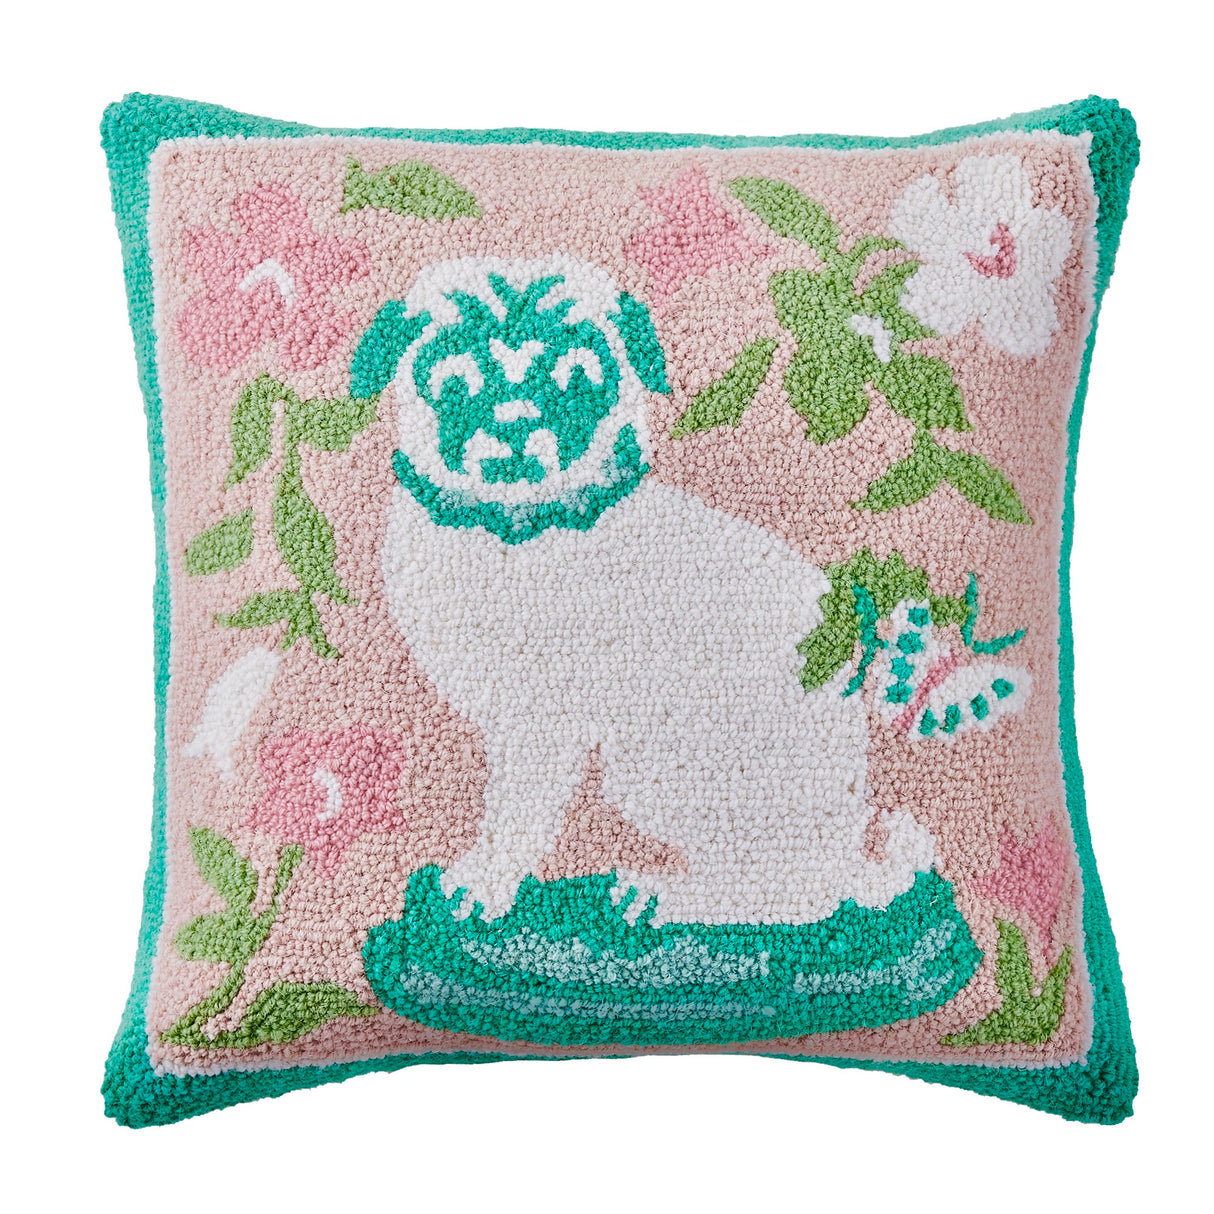 Imperial Palace Hooked Wool Pillow